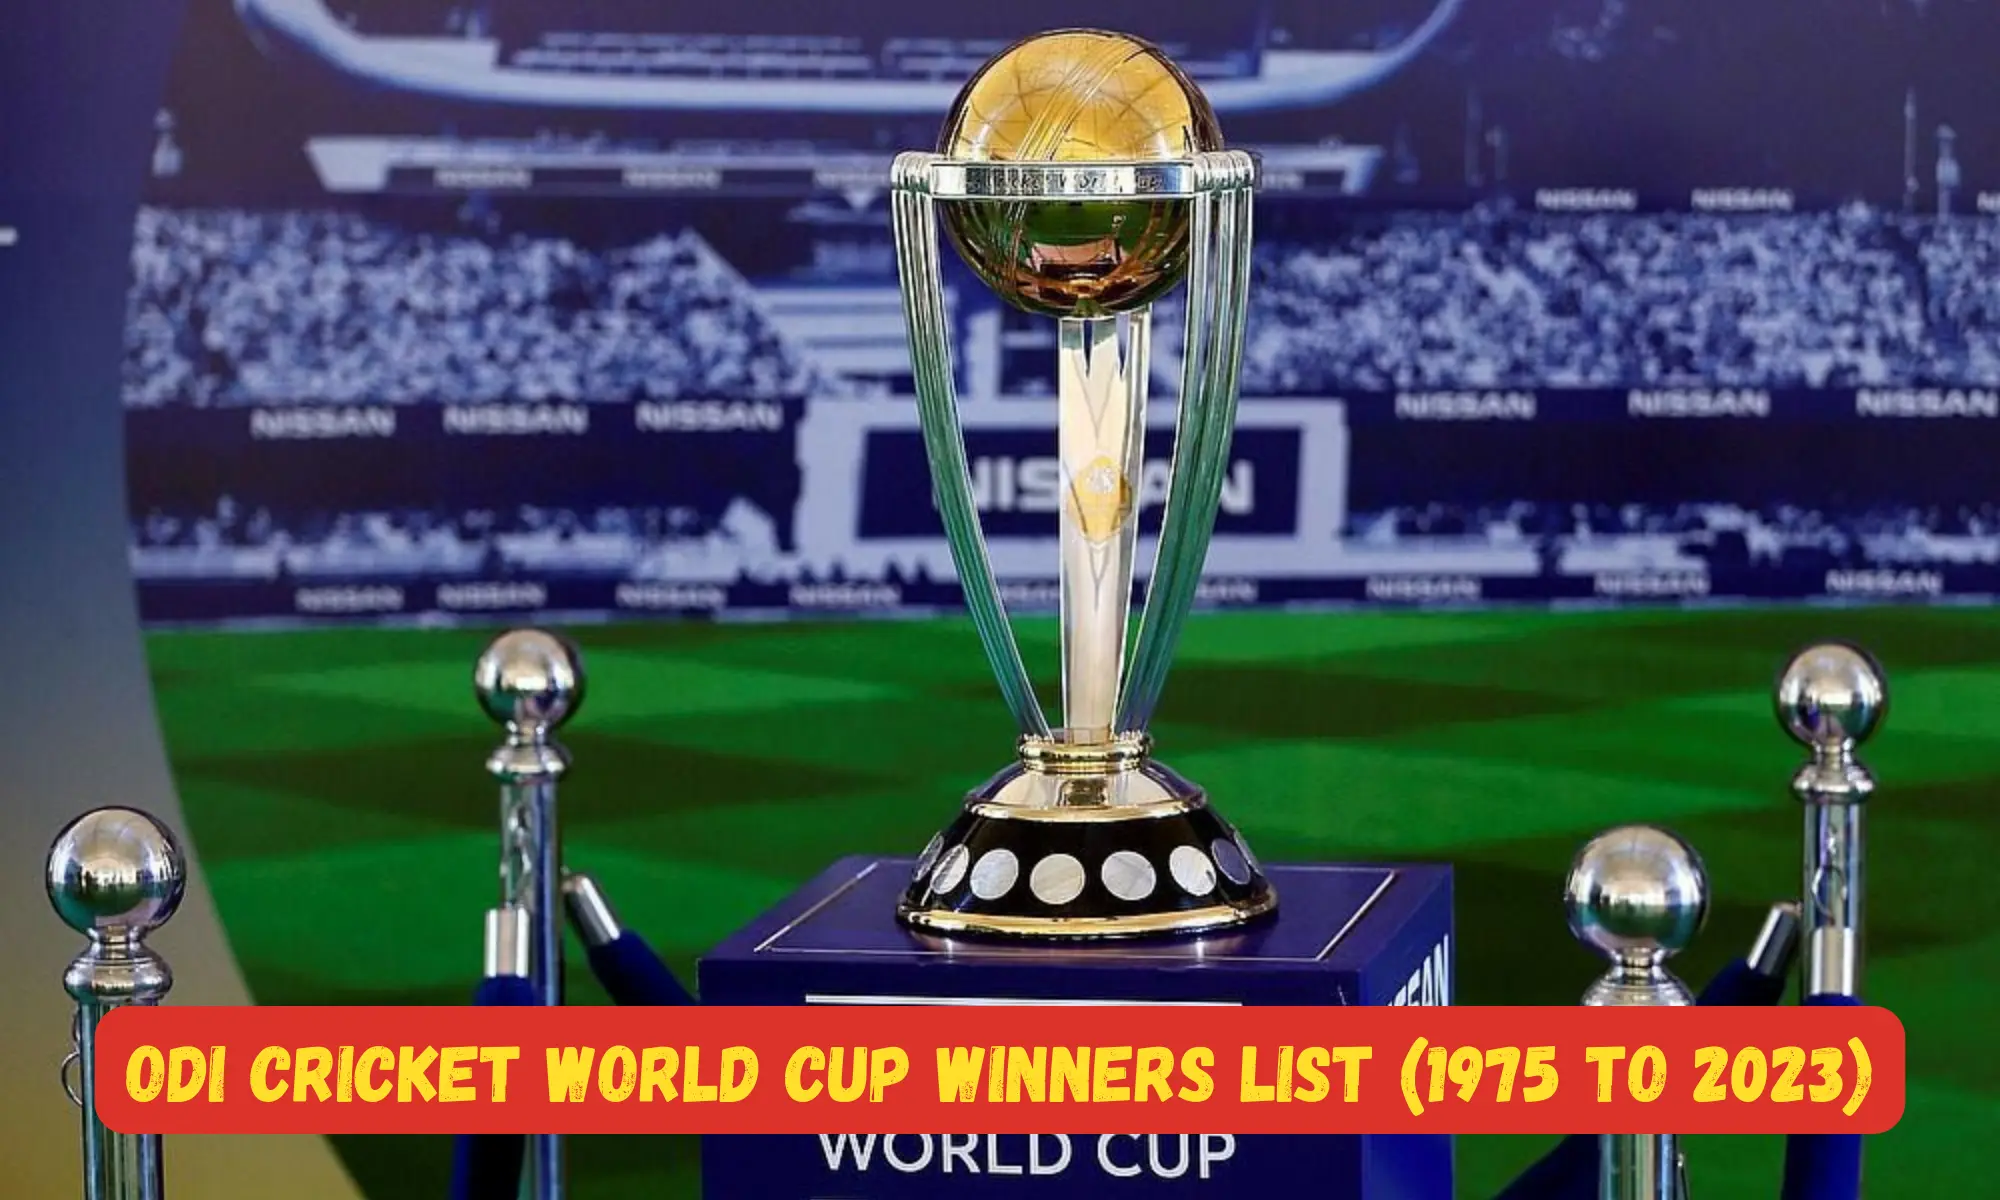 Cricket ODI World Cup Winners List From 1975 To 2023 Along With Runner-up, Captain, Man Of The Match And Player Of The Tournament Winners